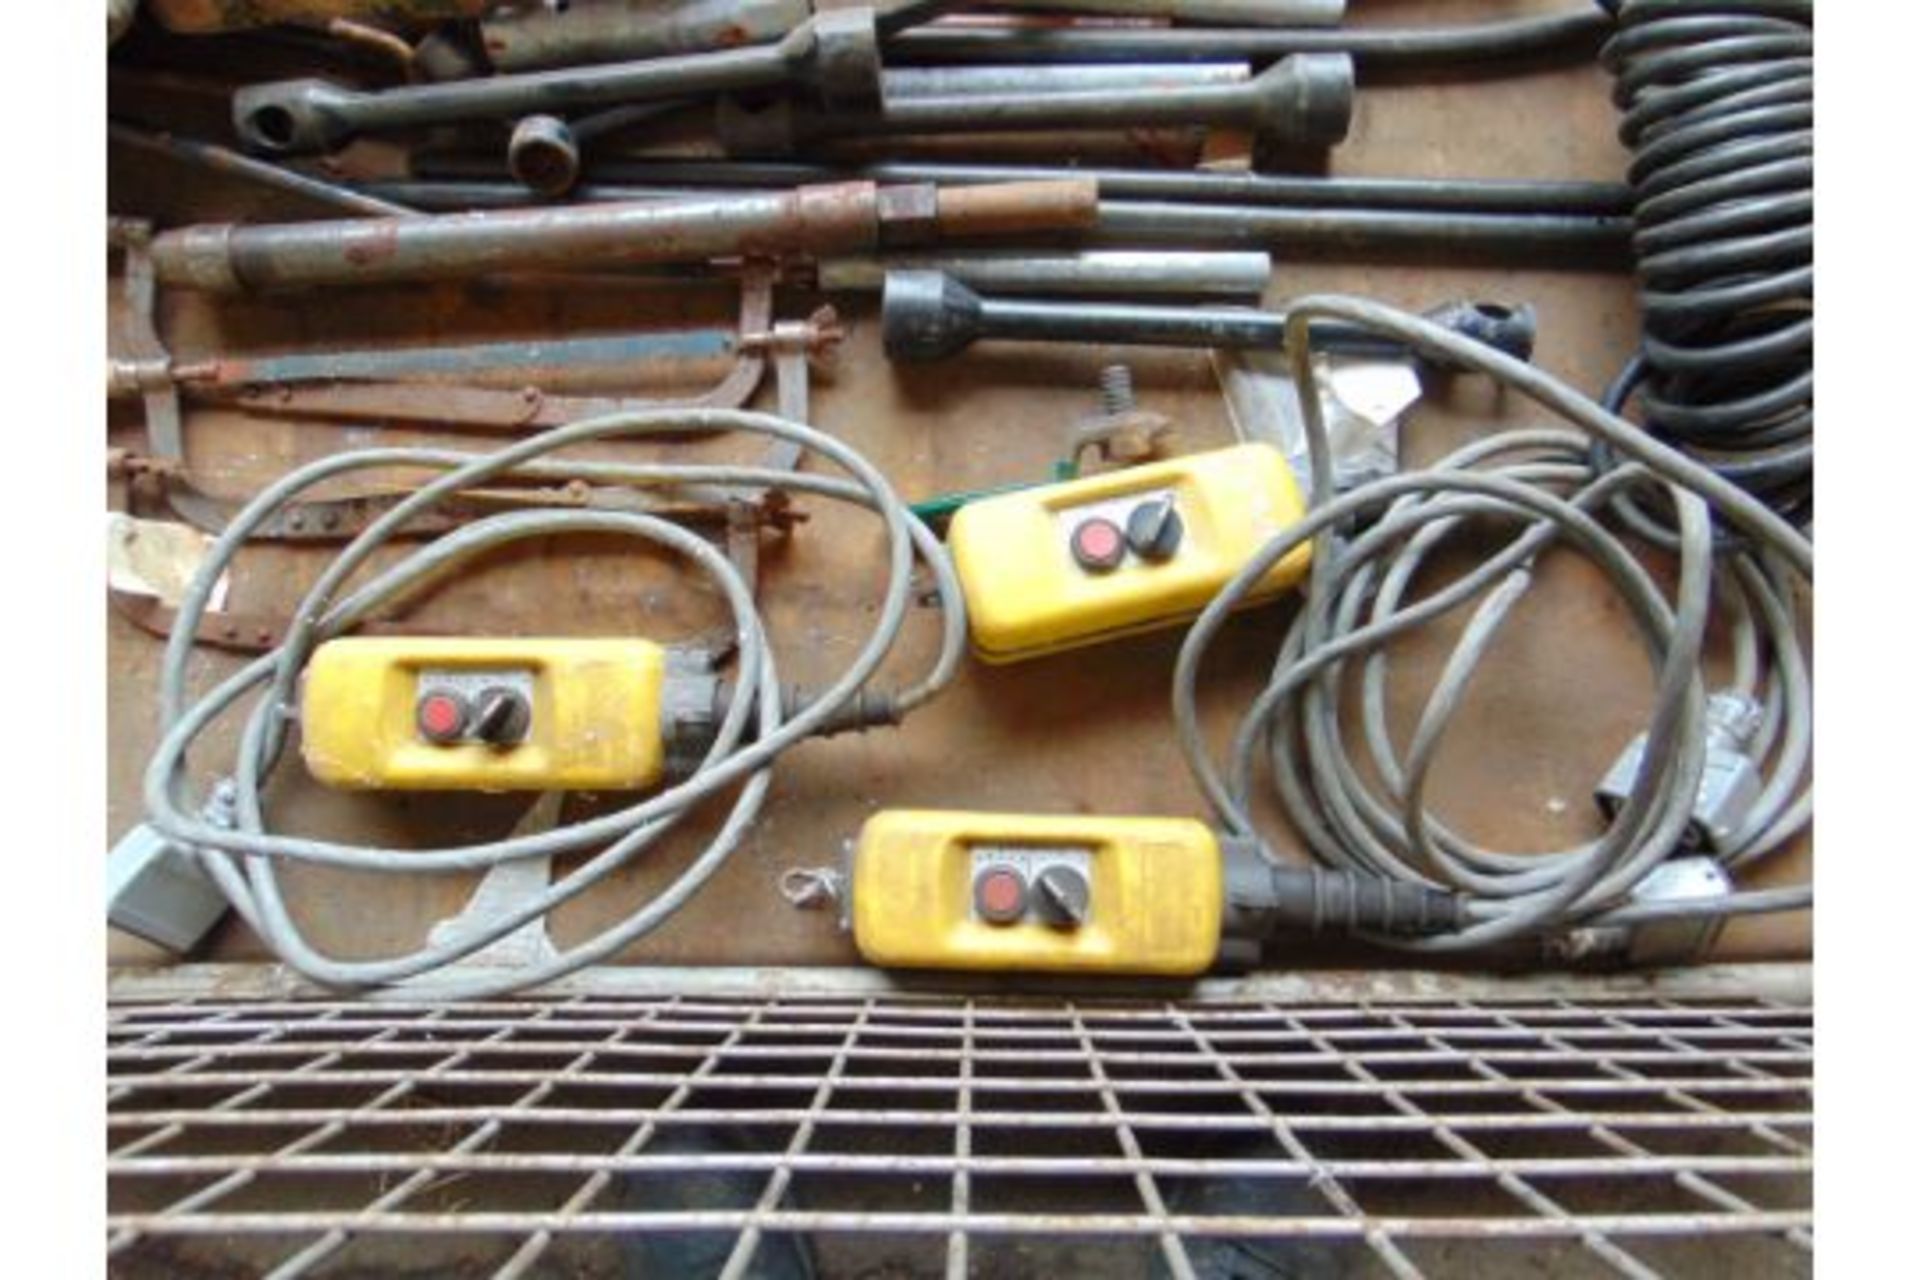 Stillage of Tools, Remote Controls, Trailer Electrical Connectors Etc - Image 2 of 4